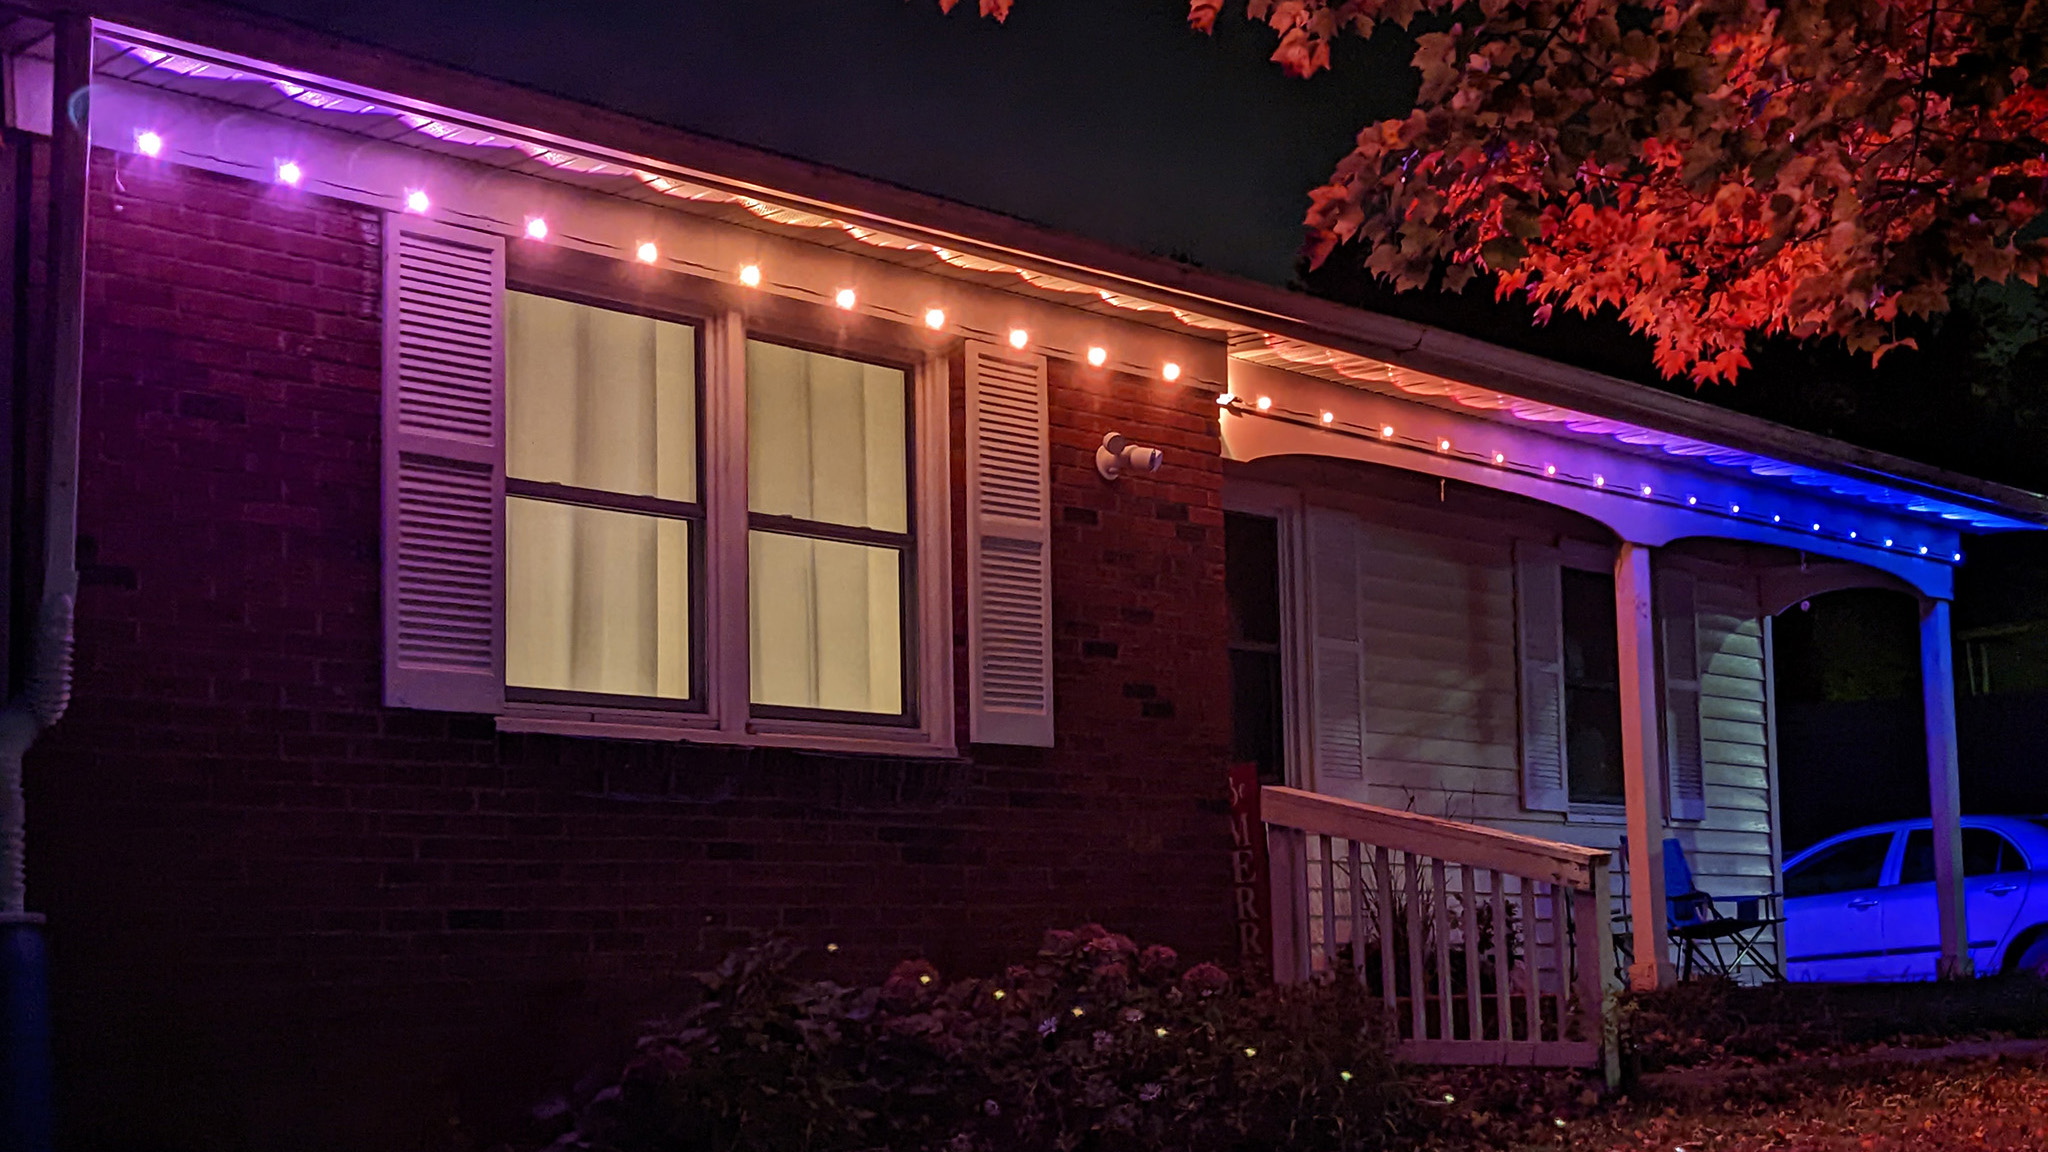 Govee RGBIC Permanent Outdoor Lights (100') Waterproof RGBIC light strip  with Wi-Fi at Crutchfield